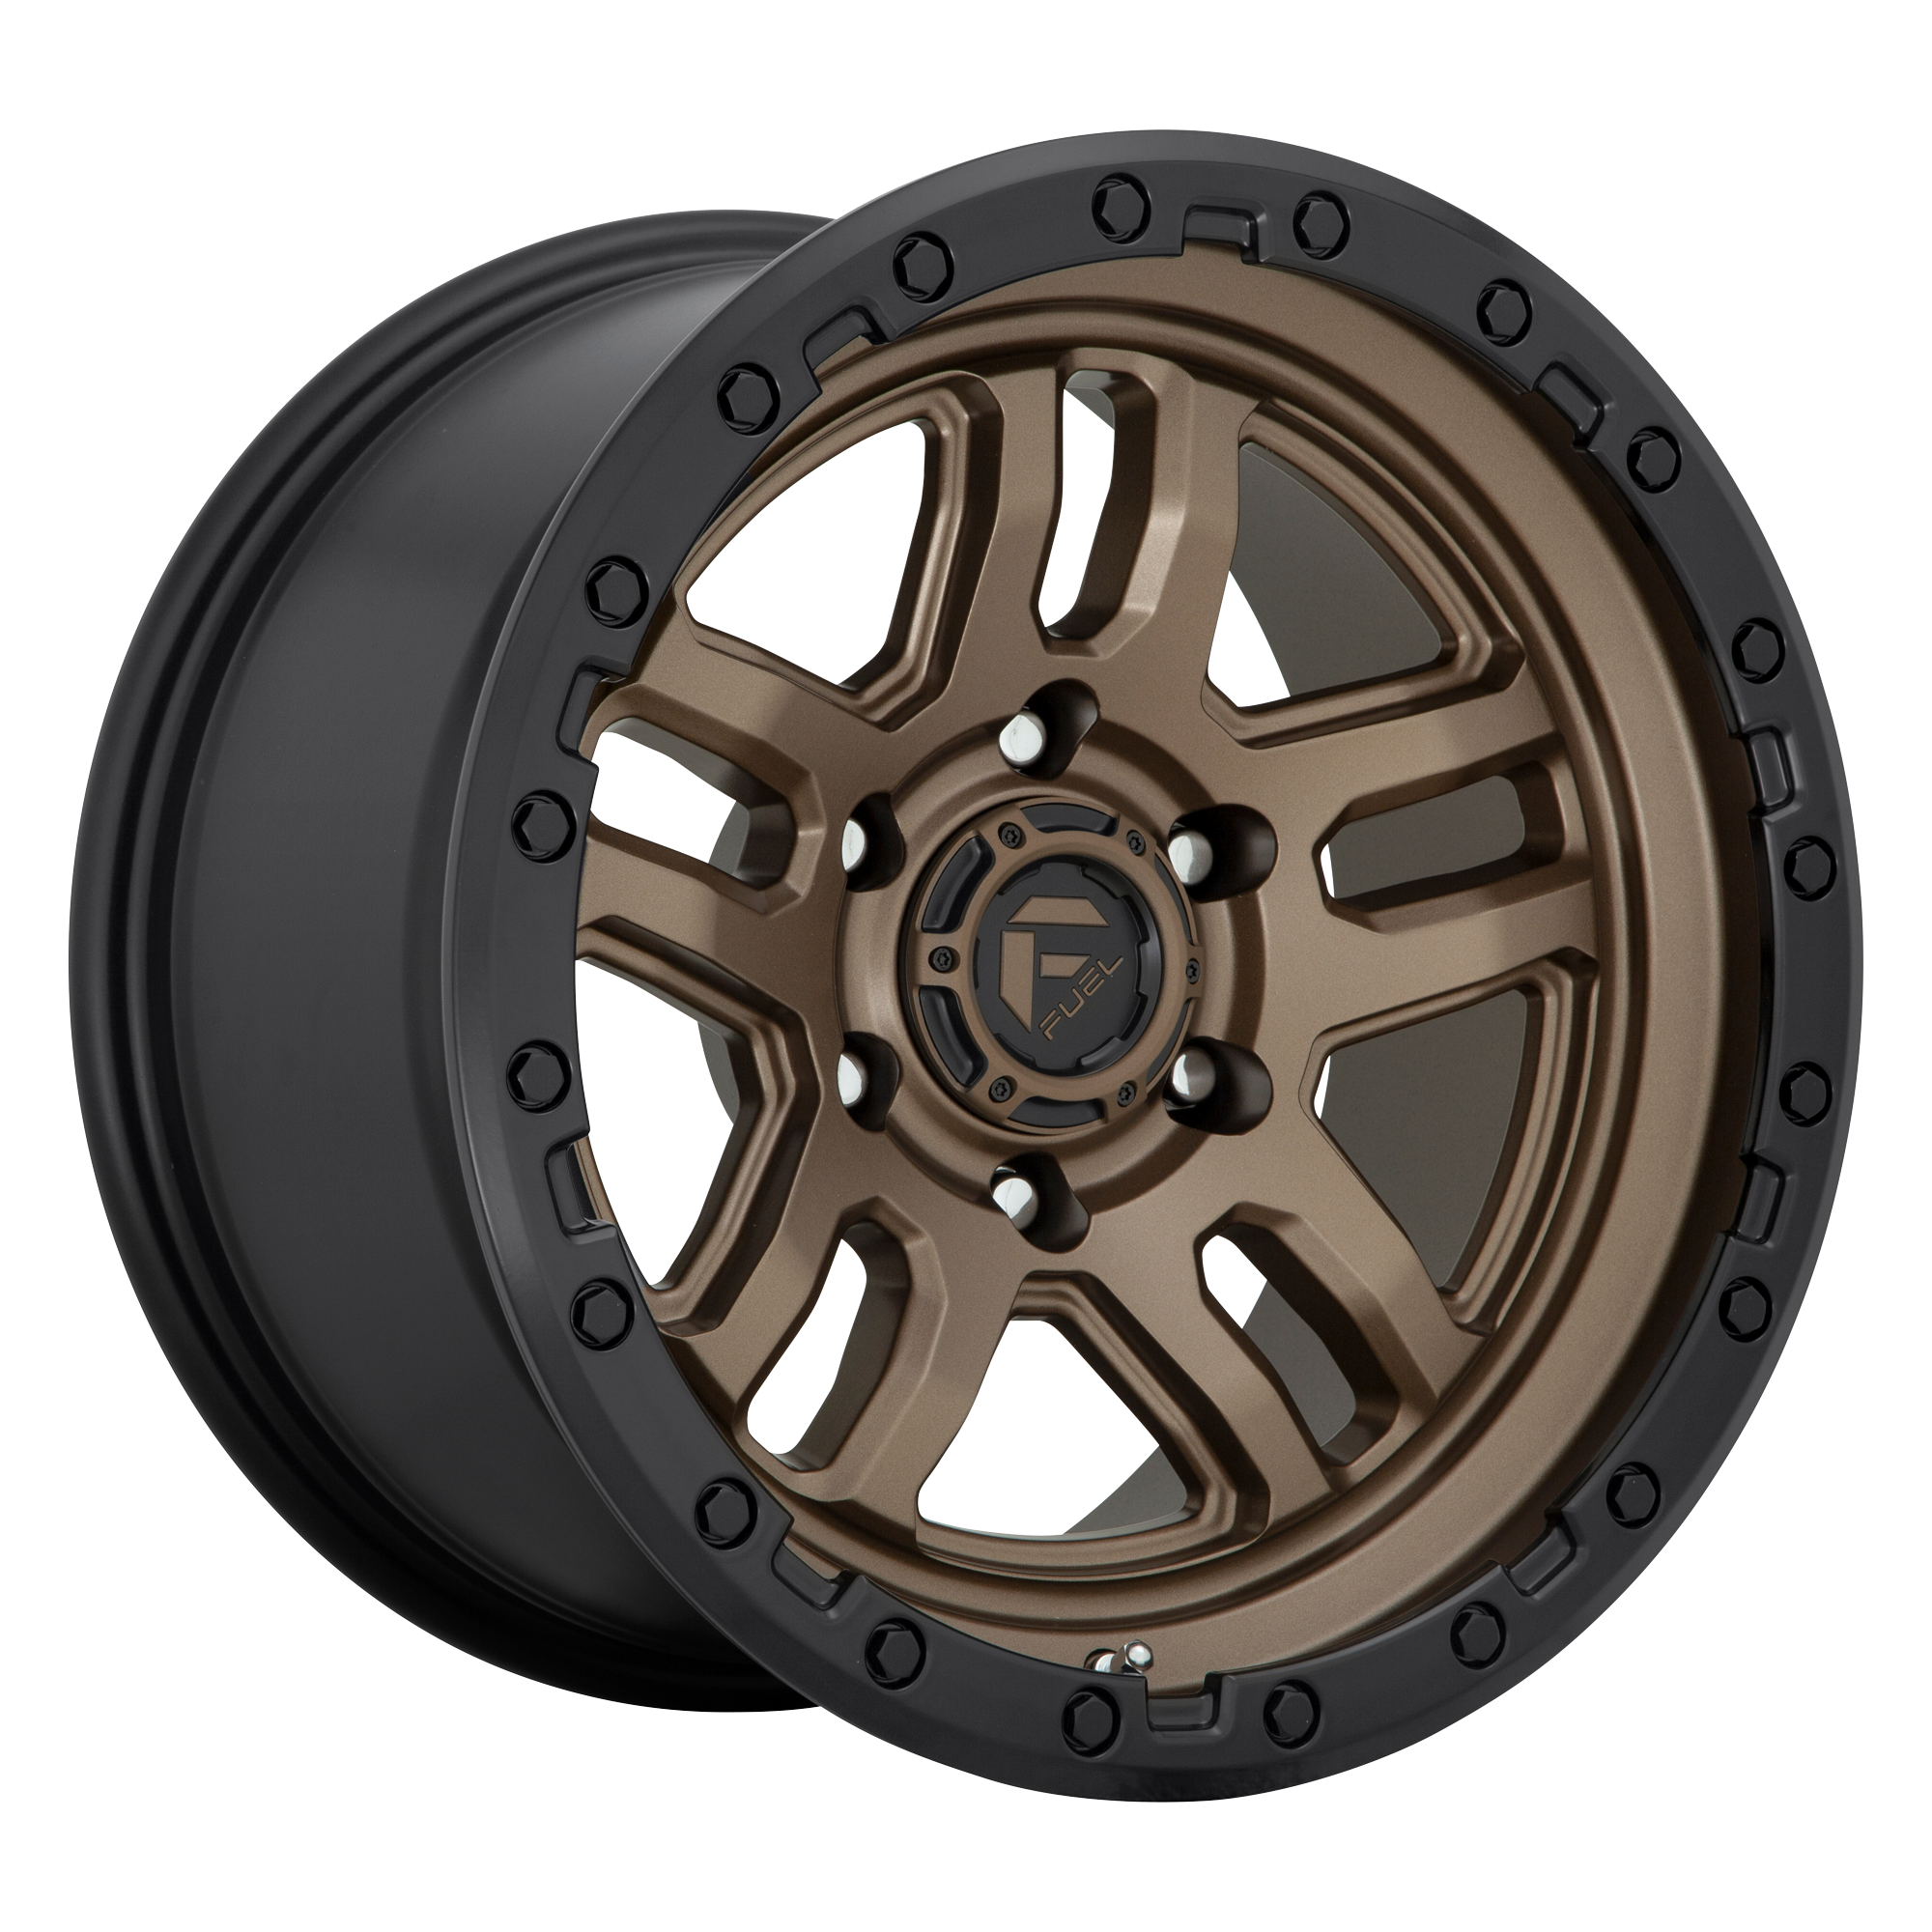 AMMO 17x9 6x139.70 MATTE BRONZE BLACK BEAD RING (-12 mm) - Tires and Engine Performance